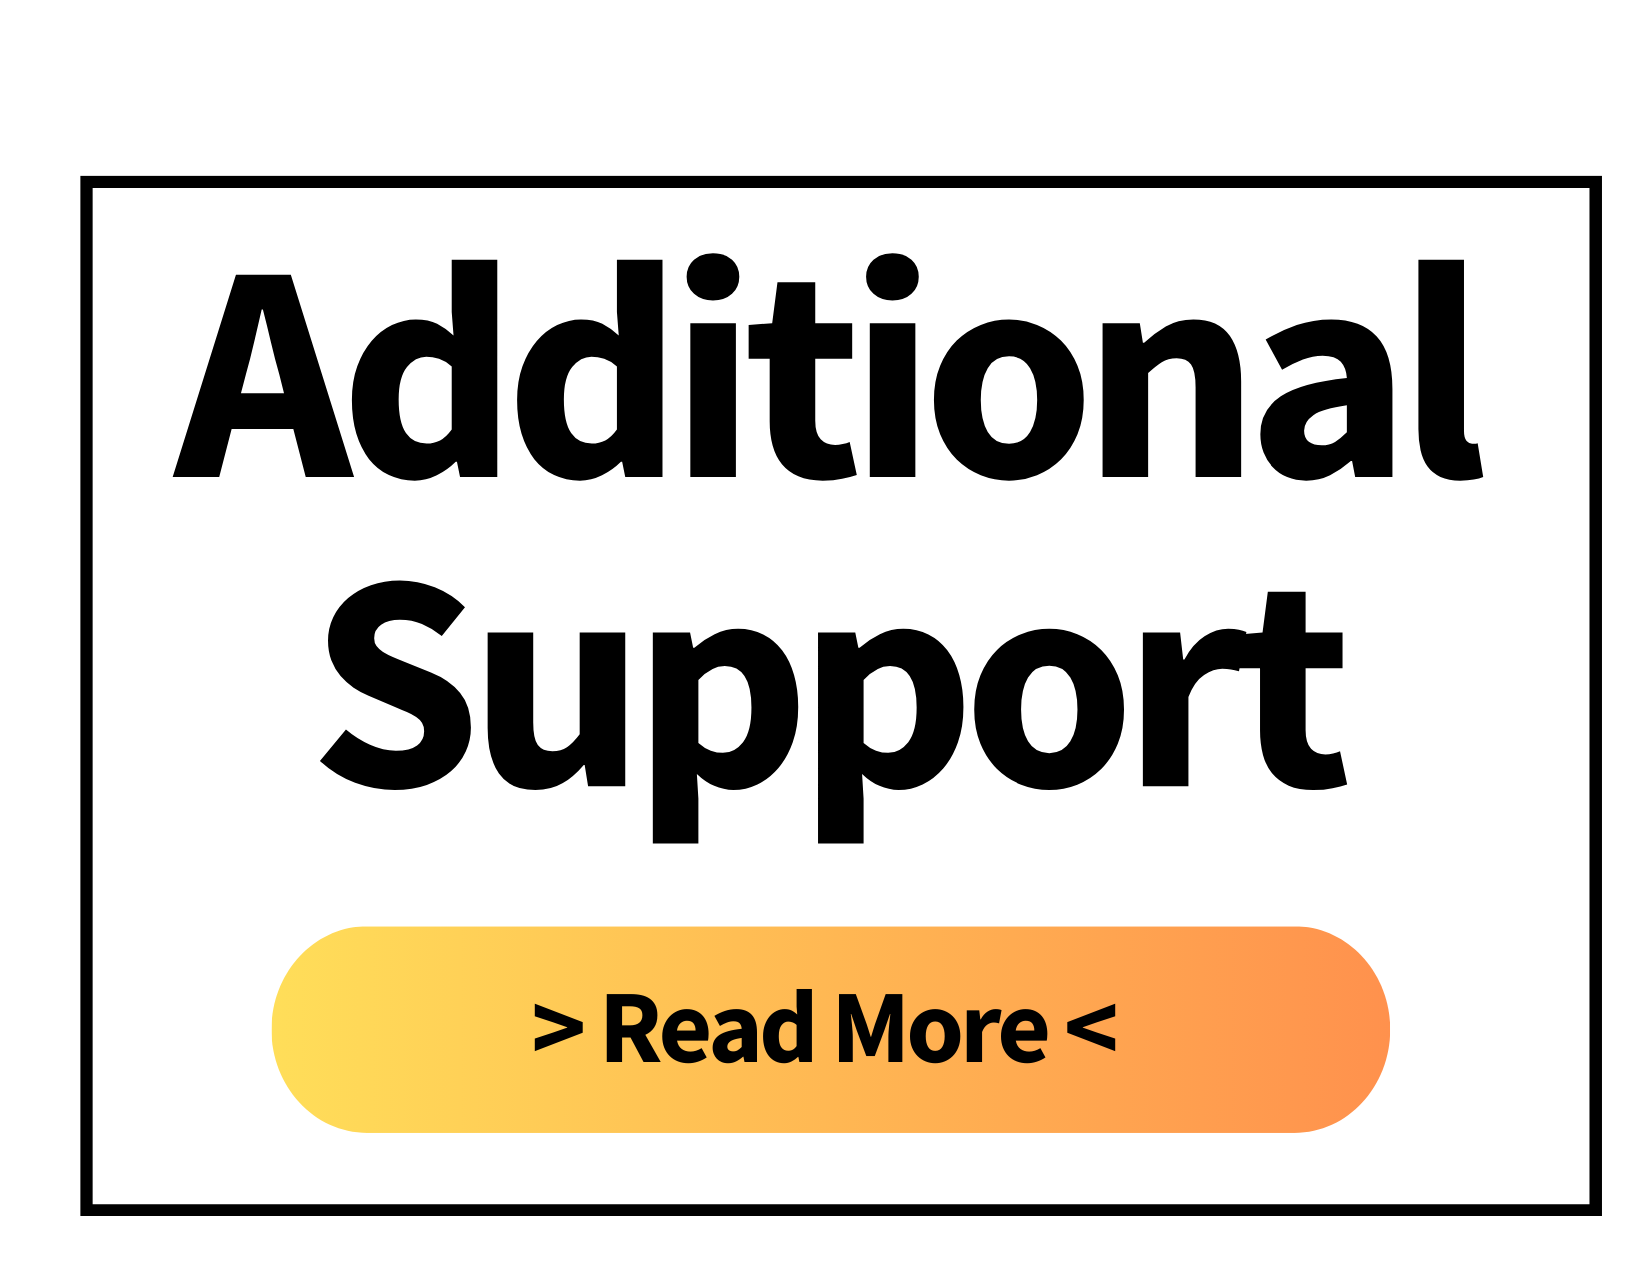 Additional Support: Read more